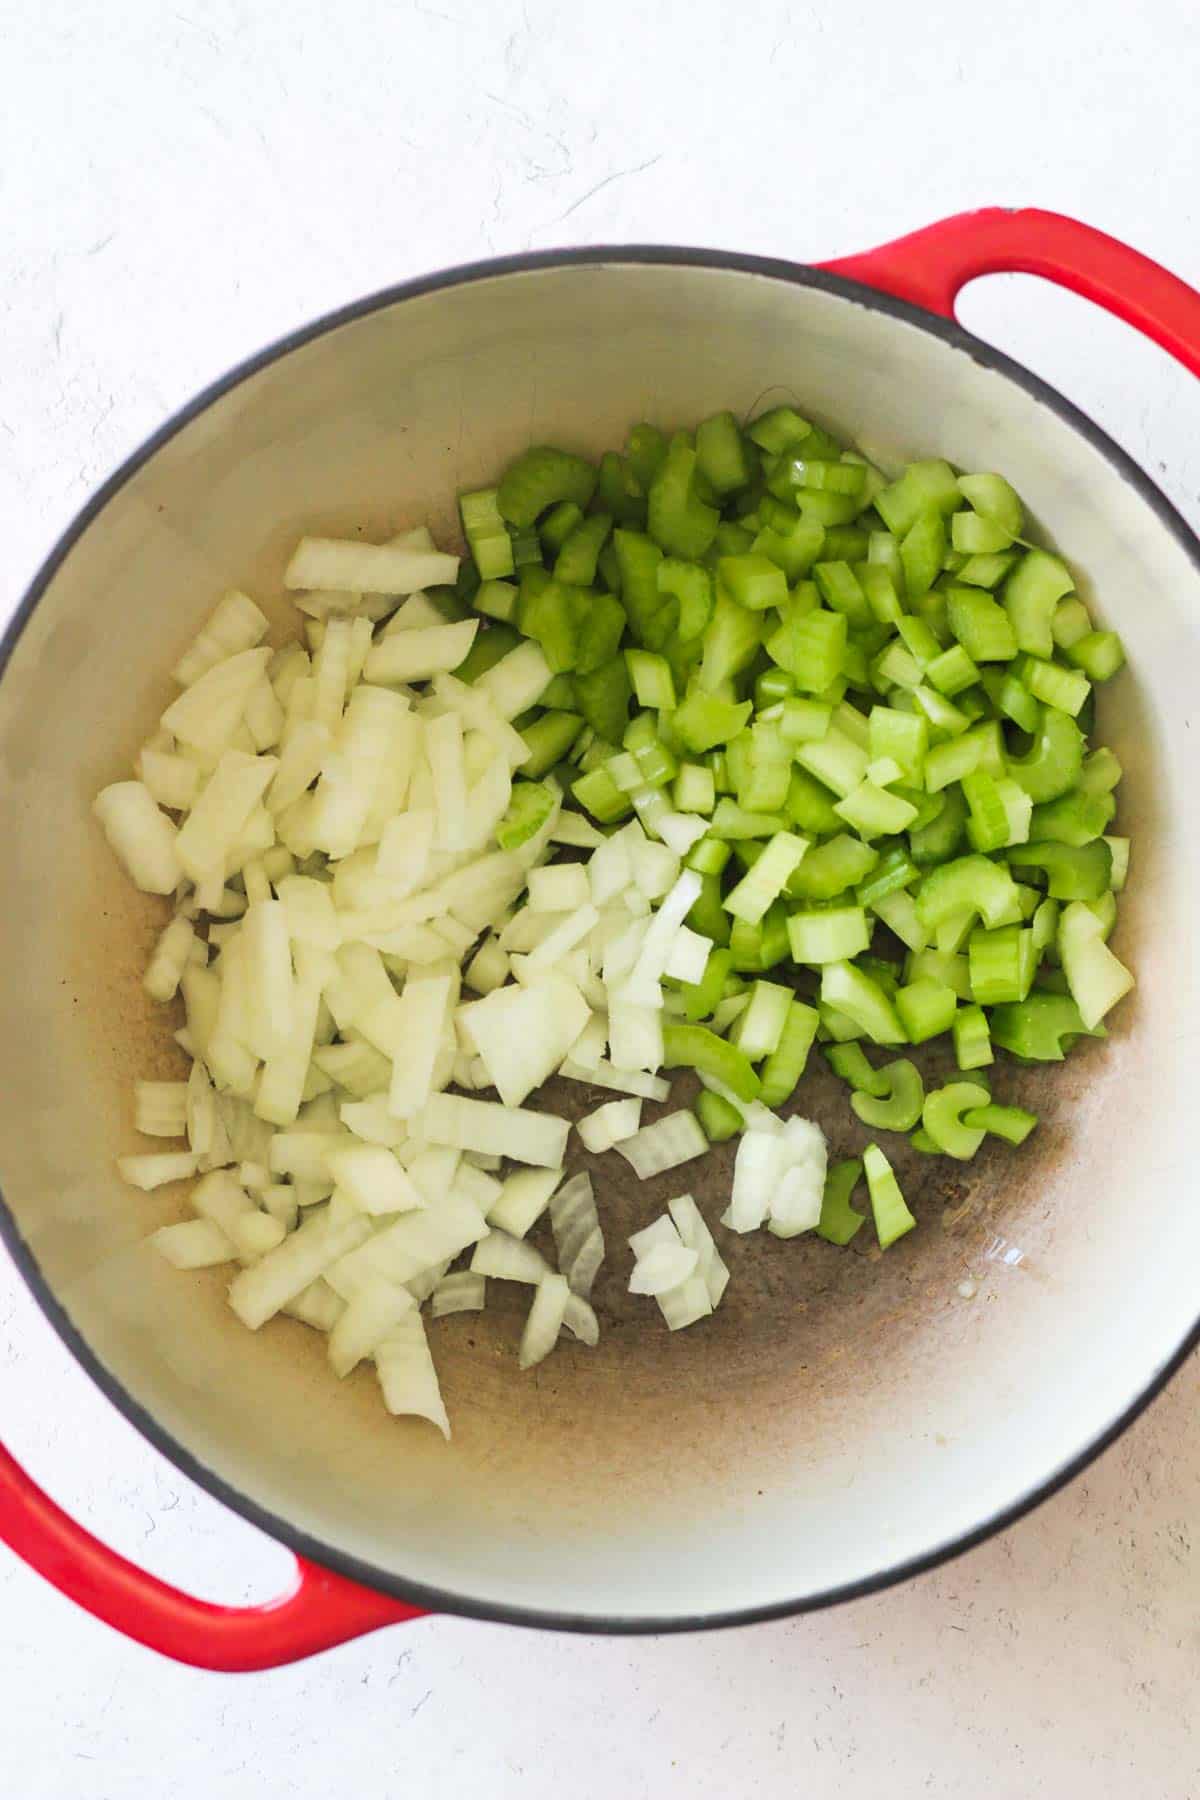 chopped celery and onion in the red pot